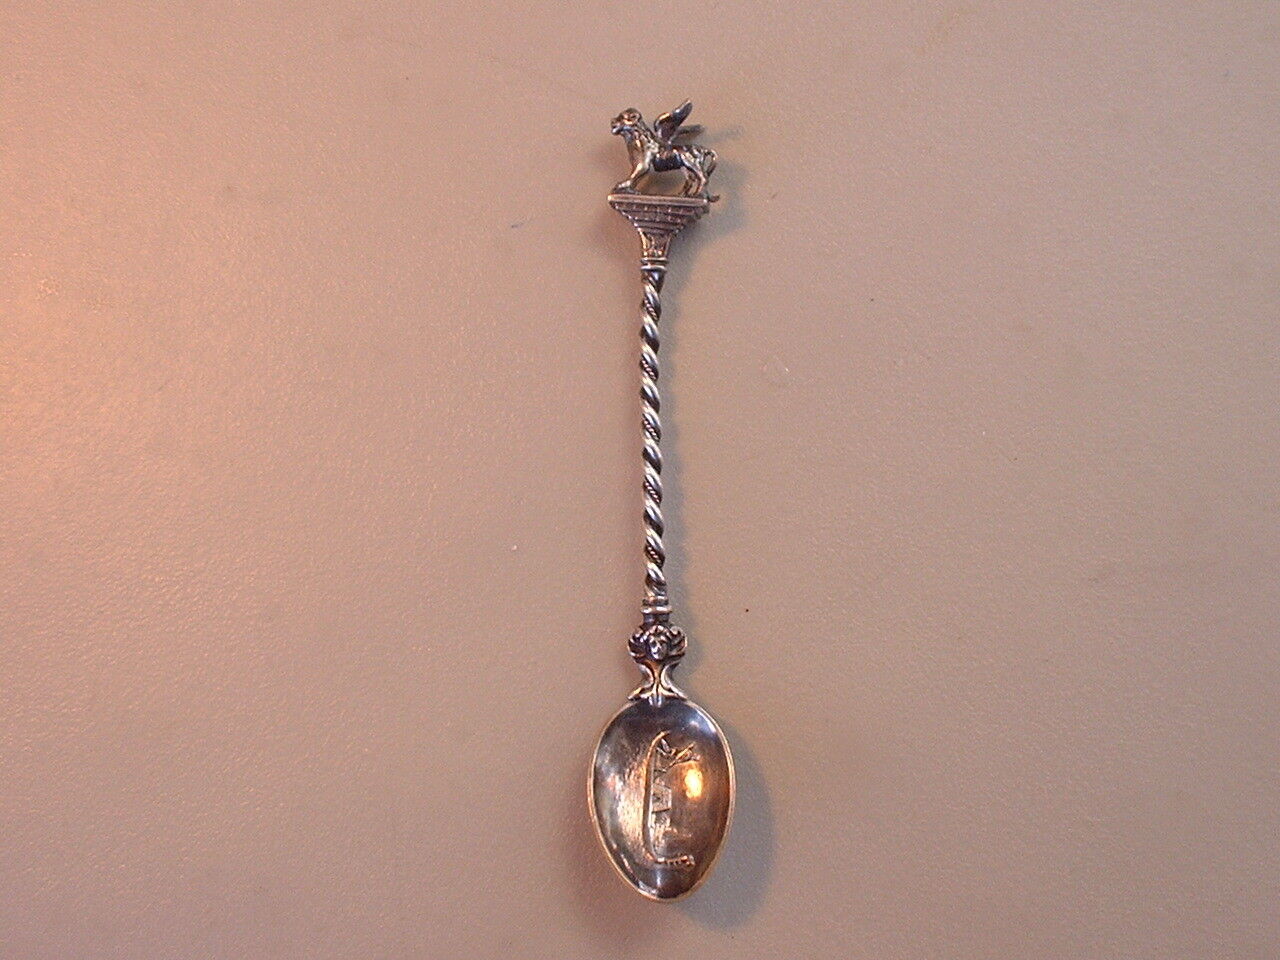 Antique 19ThC Italian Souvenir Spoon Dated 1895 with Winged Lion